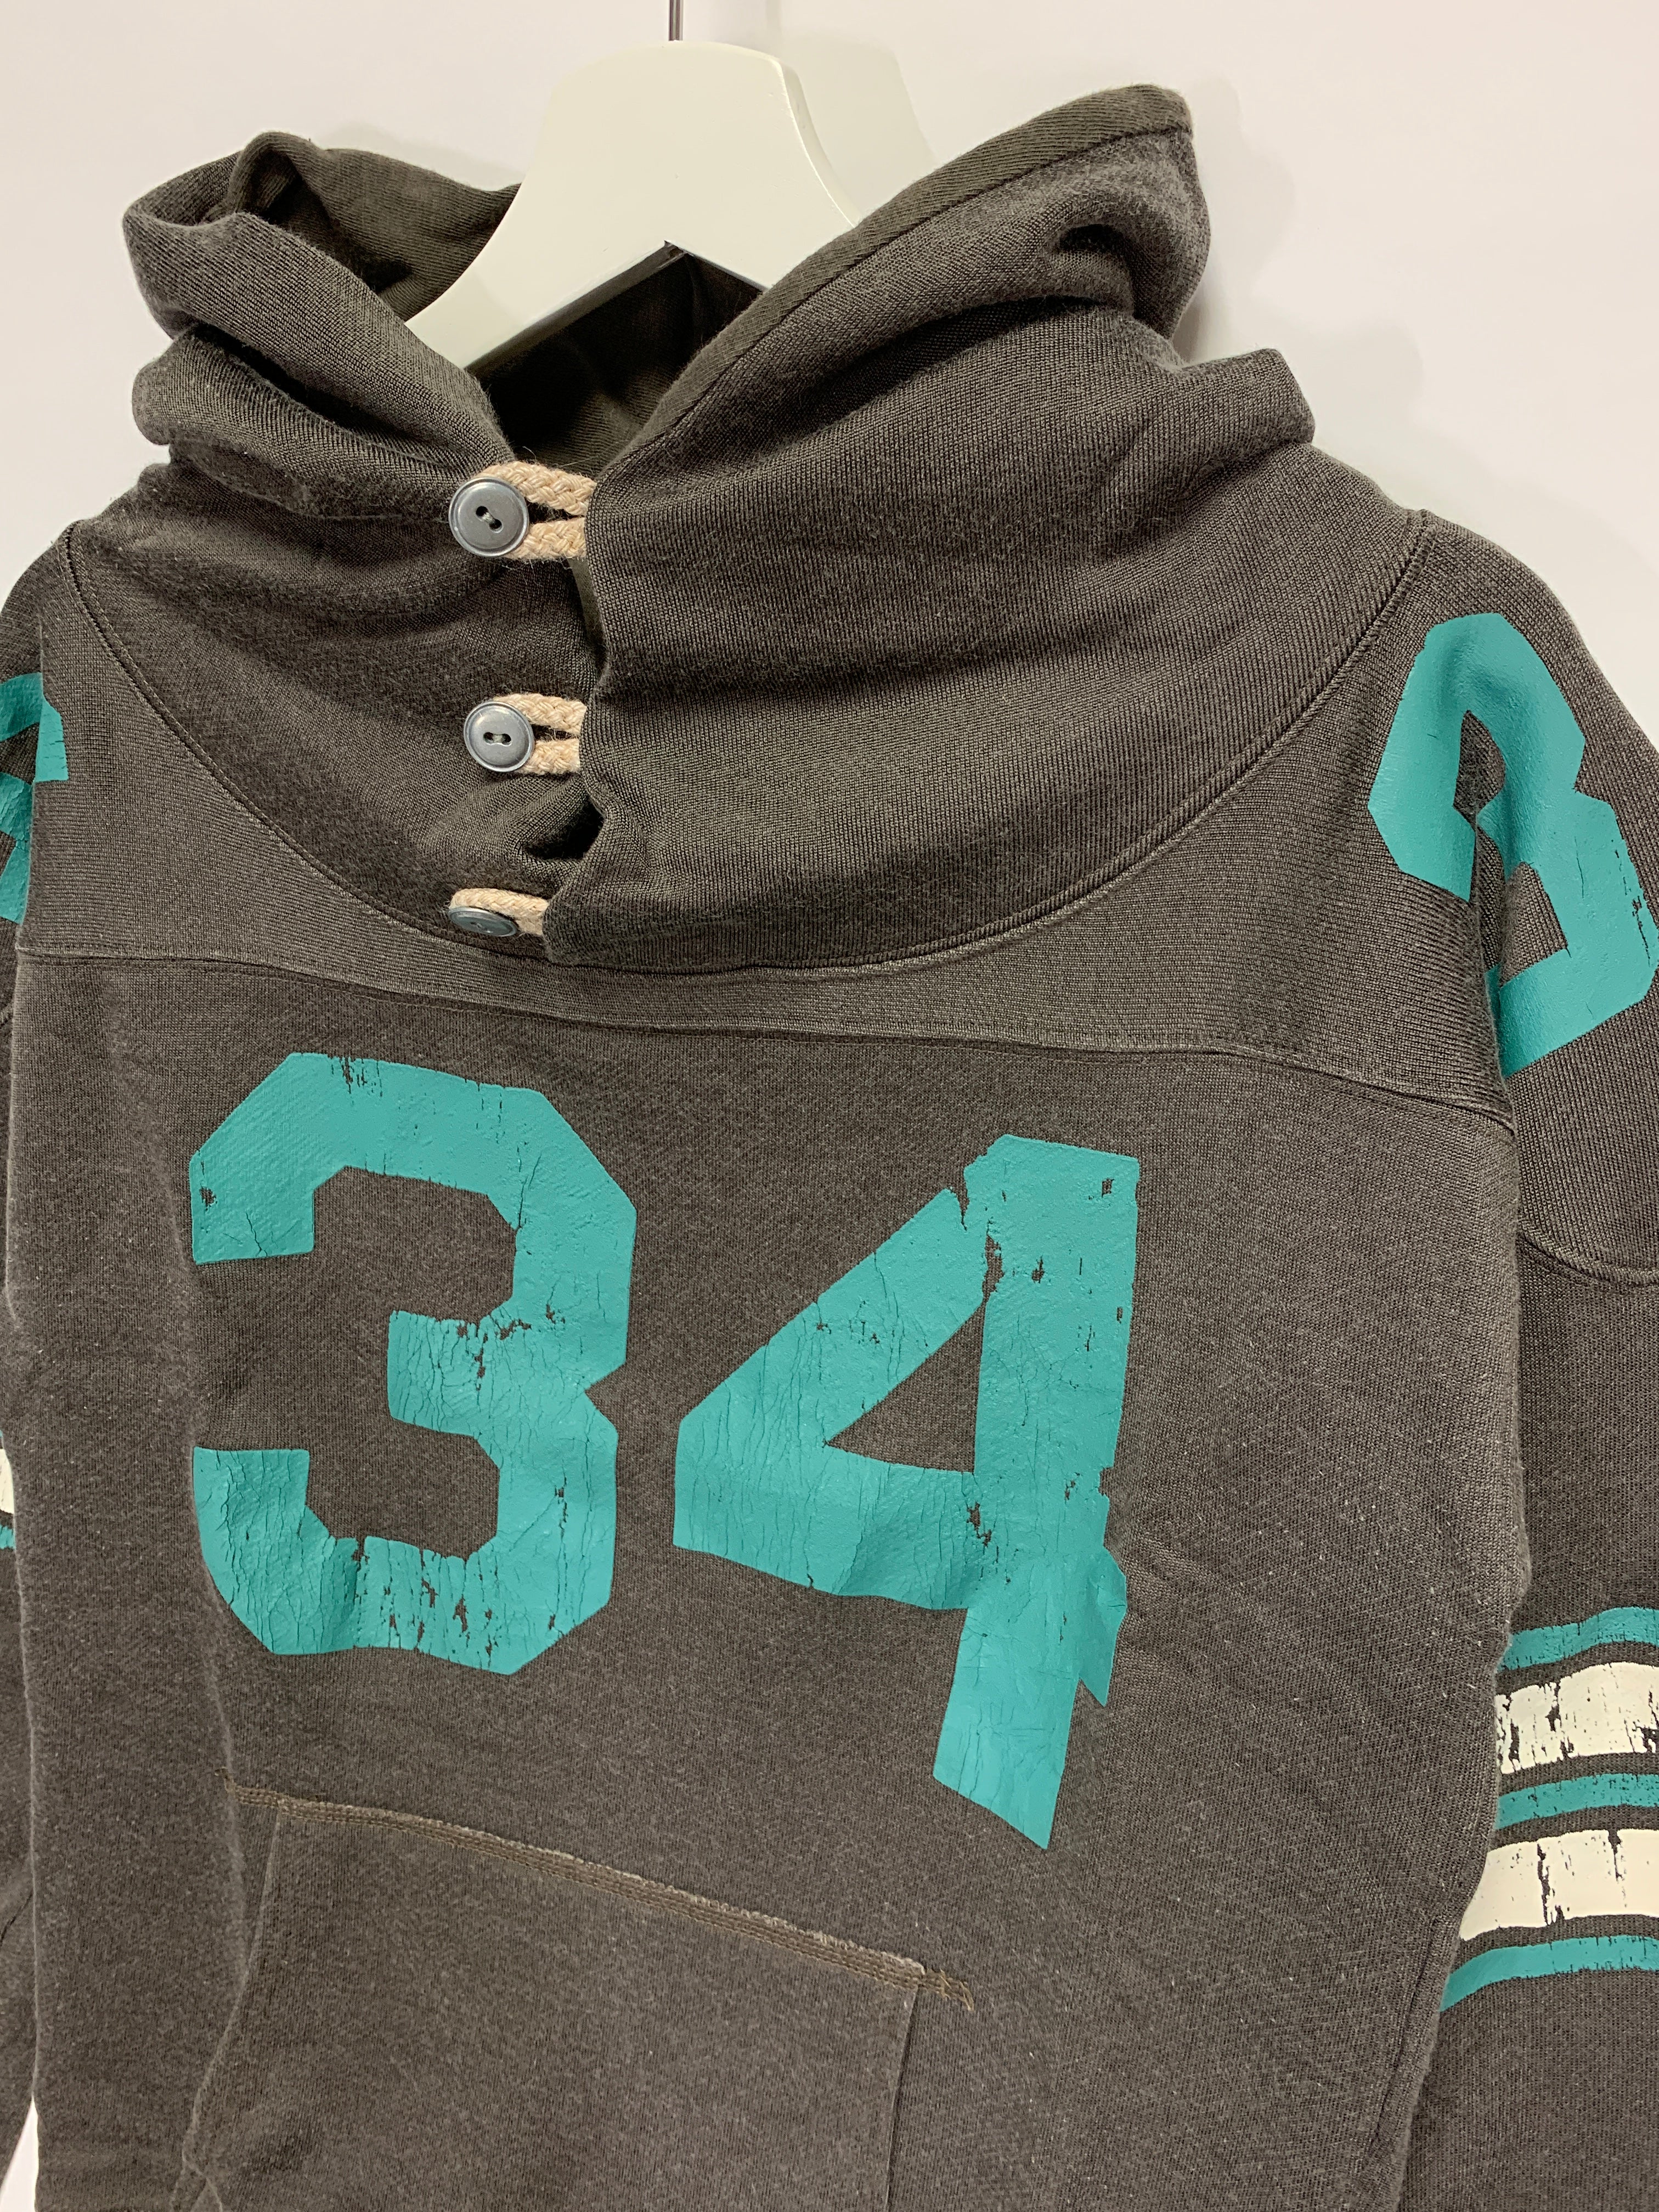 Sports Football Retro Adult Pull-Over Hoodie by Riza Ldi - Pixels